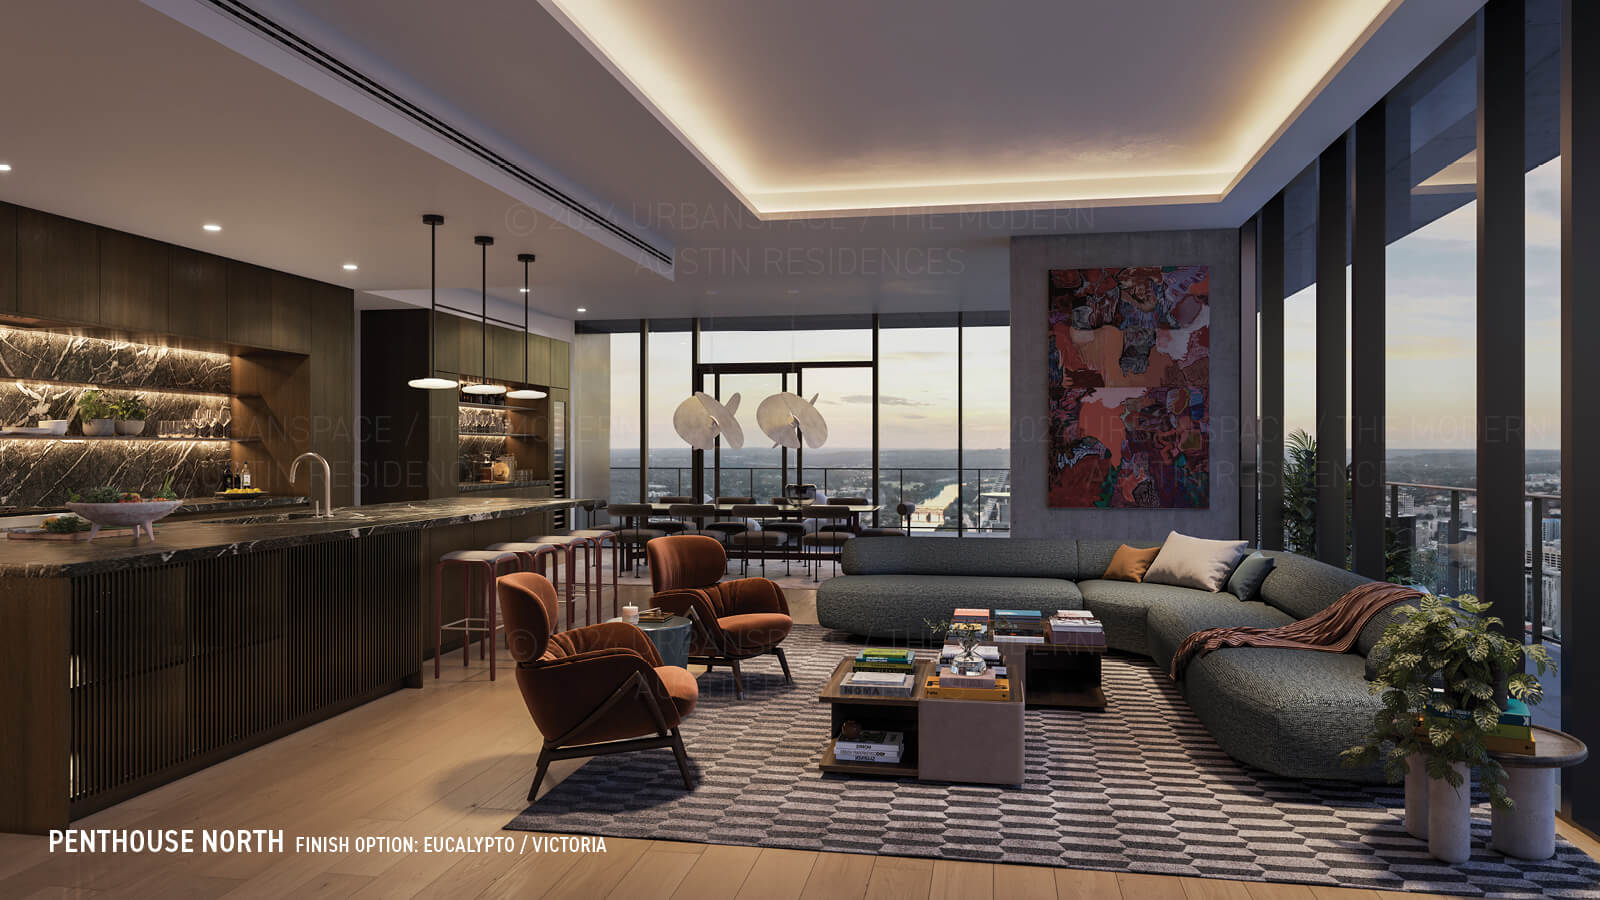 Modern Austin Residences Penthouse North floor plan - living room in Victoria finish